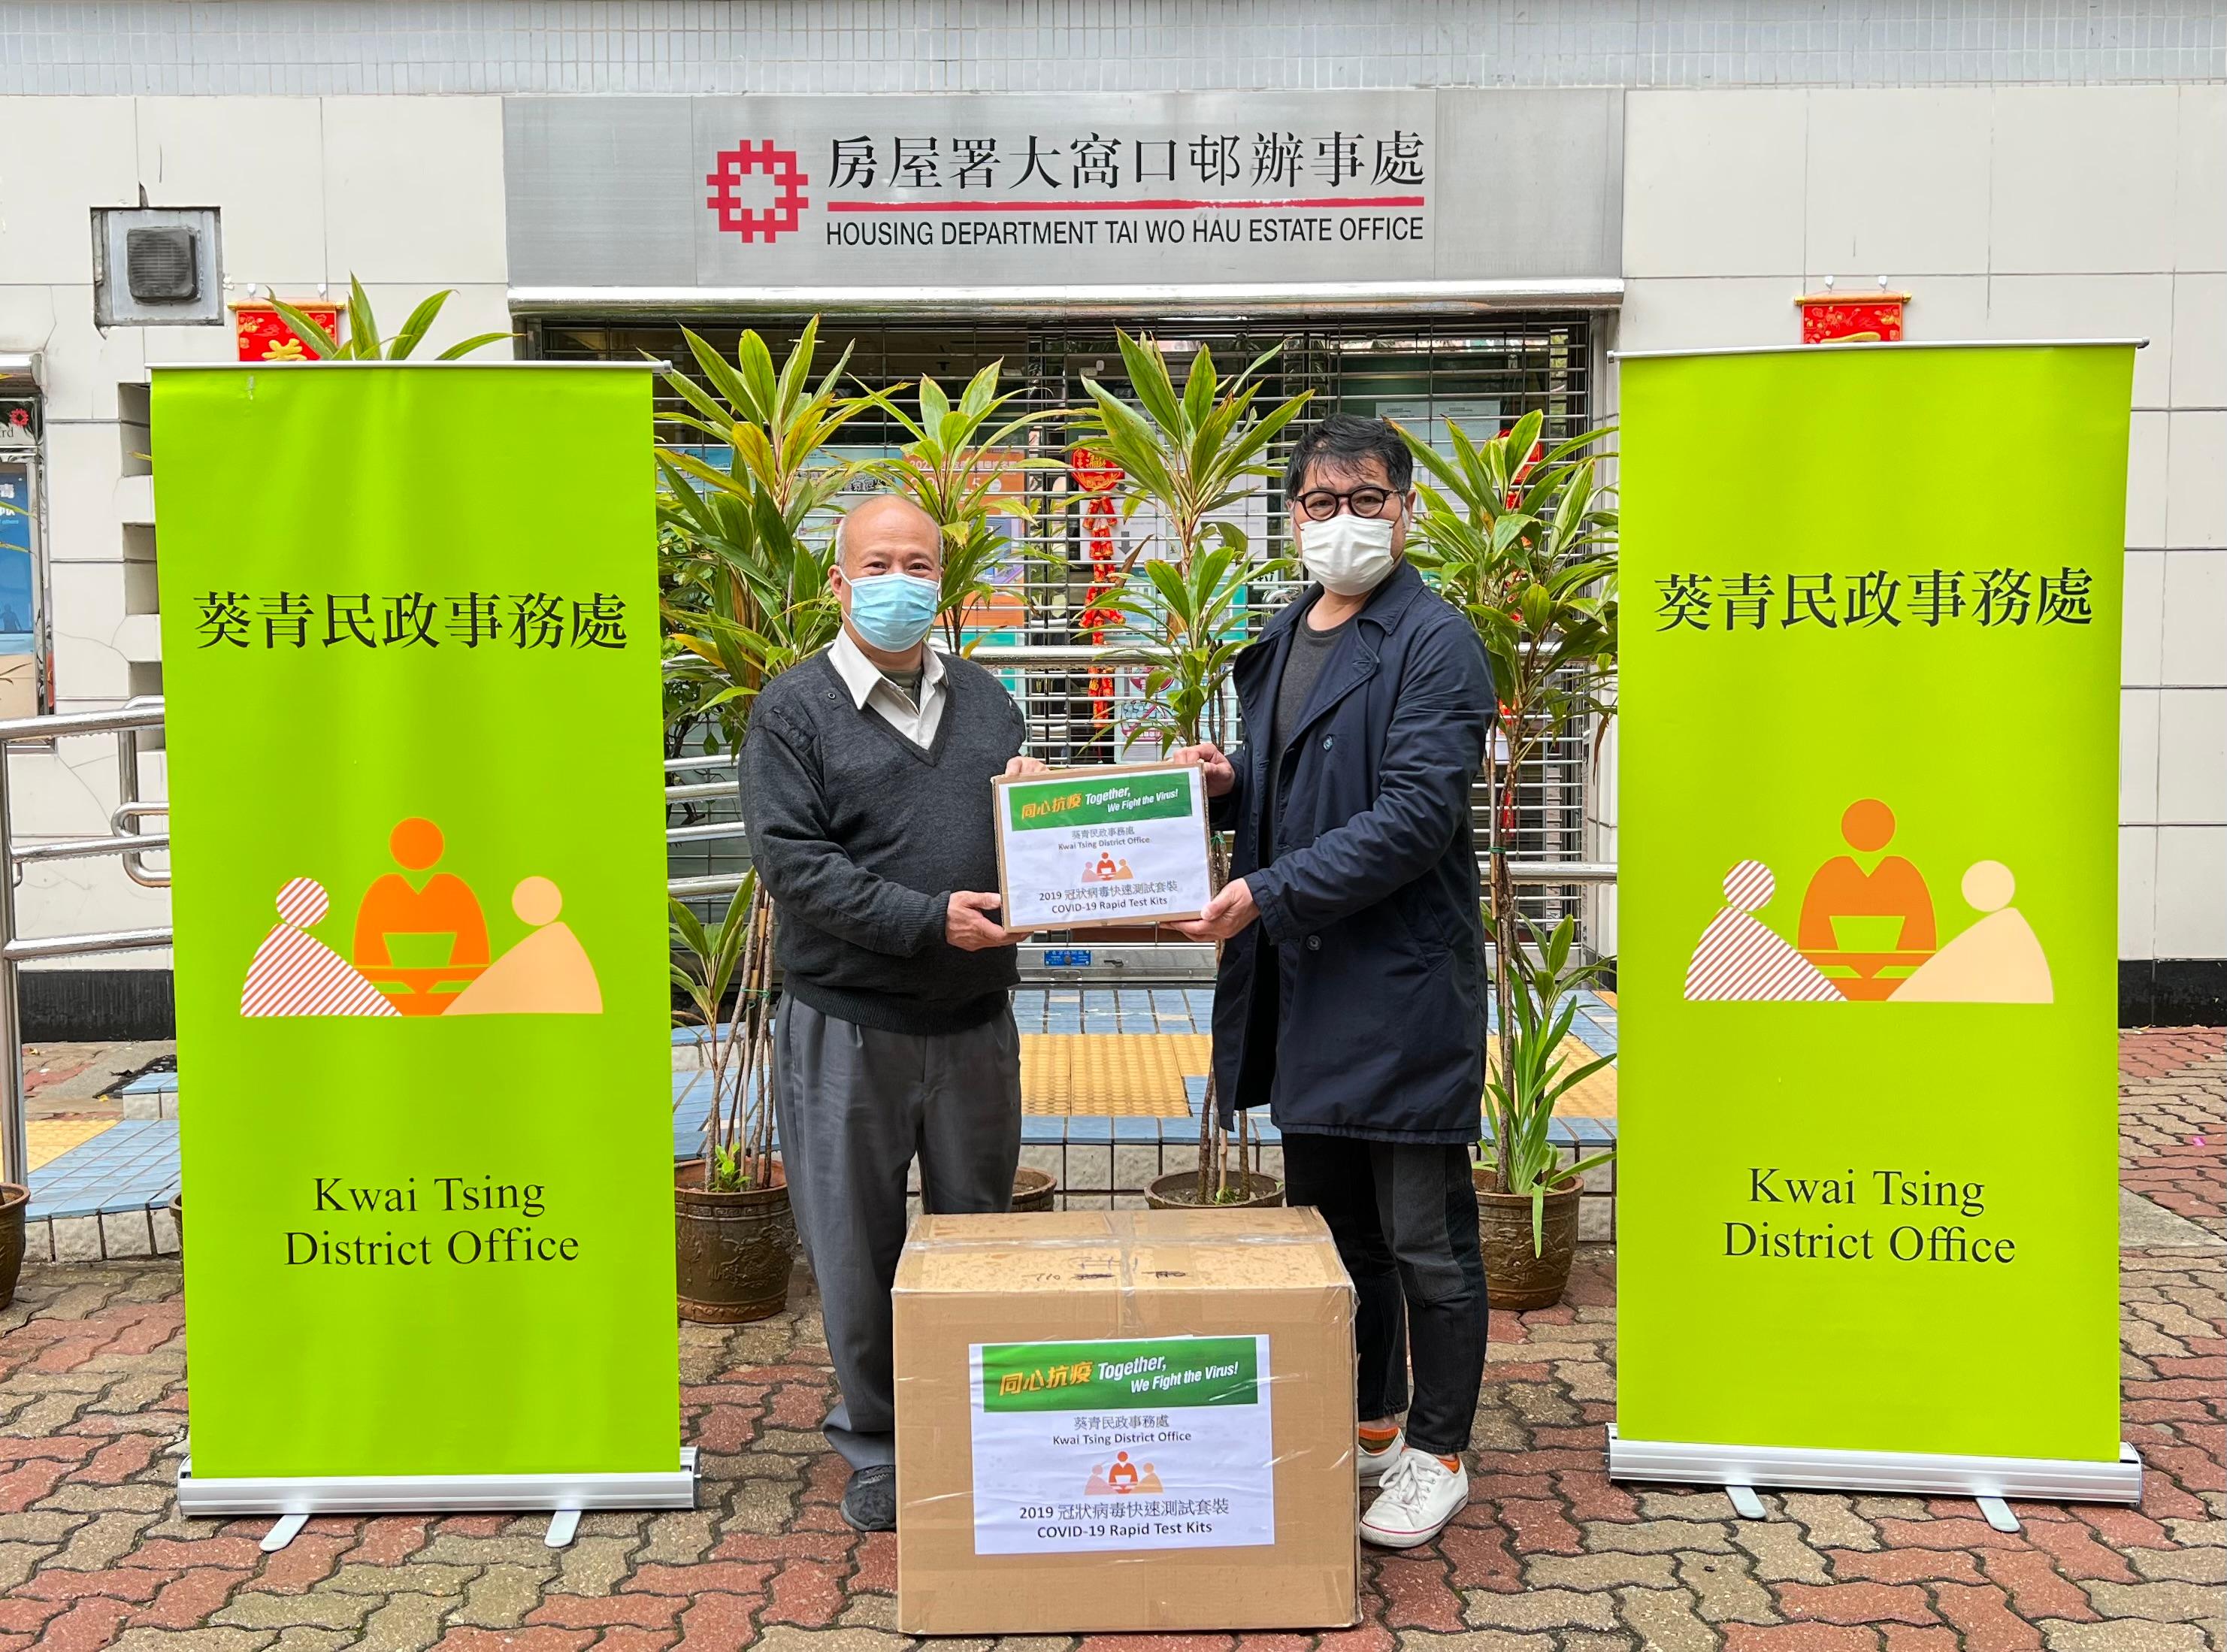 The Kwai Tsing District Office today (February 19) distributed COVID-19 rapid test kits to cleansing workers and property management staff working in Cheung Ching Estate and Tai Wo Hau Estate for voluntary testing through the Housing Department and the property management companies.